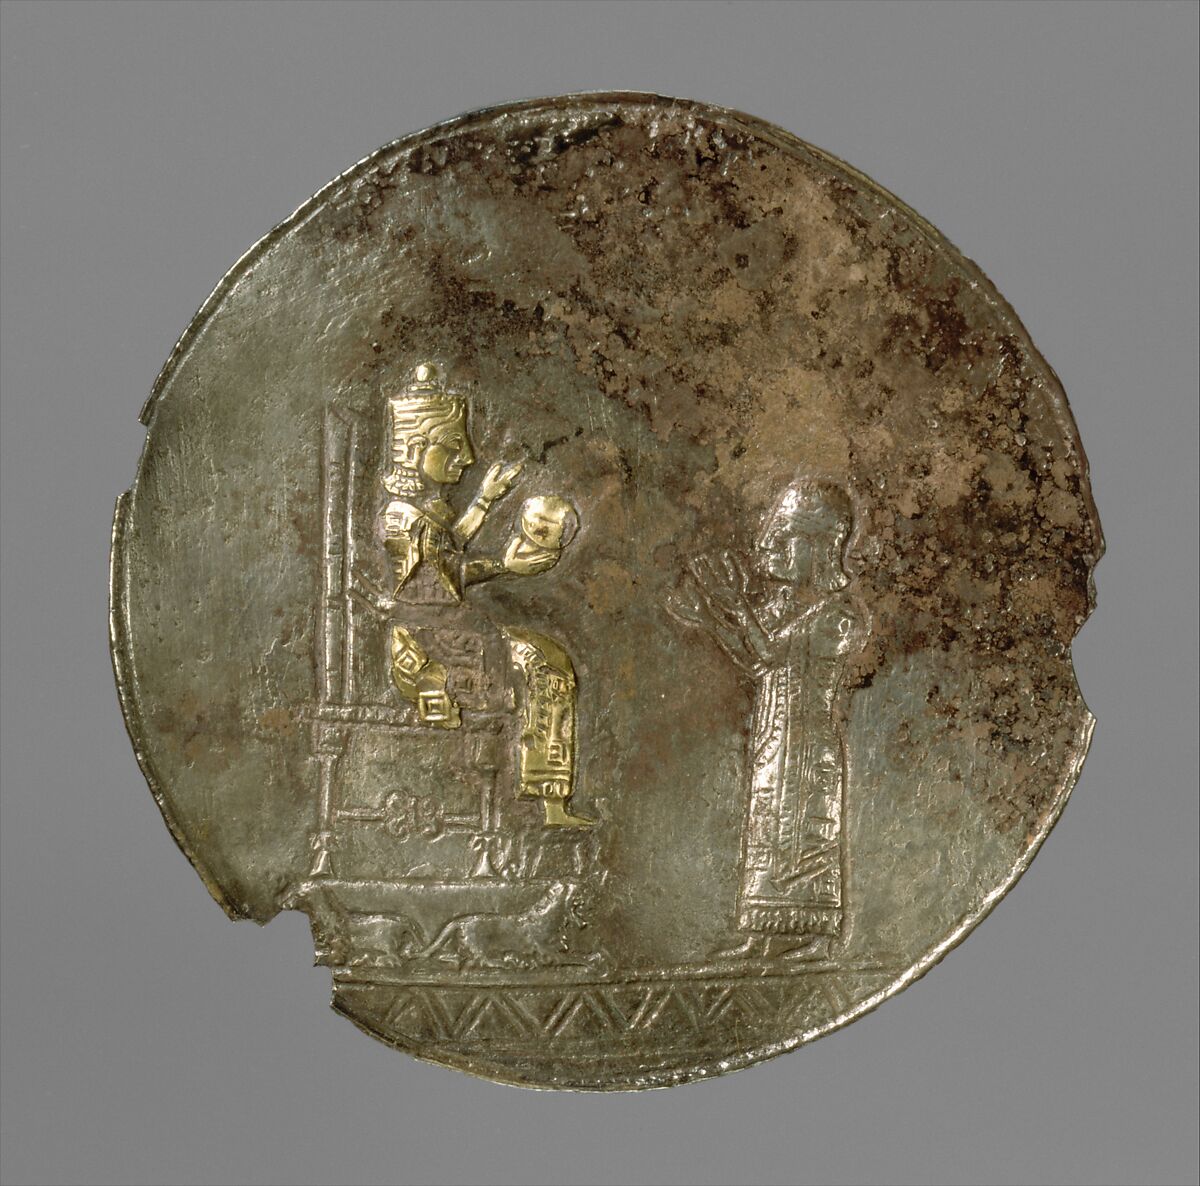 Medallion with a seated deity and a male worshiper, Silver, gold foil, Urartian 